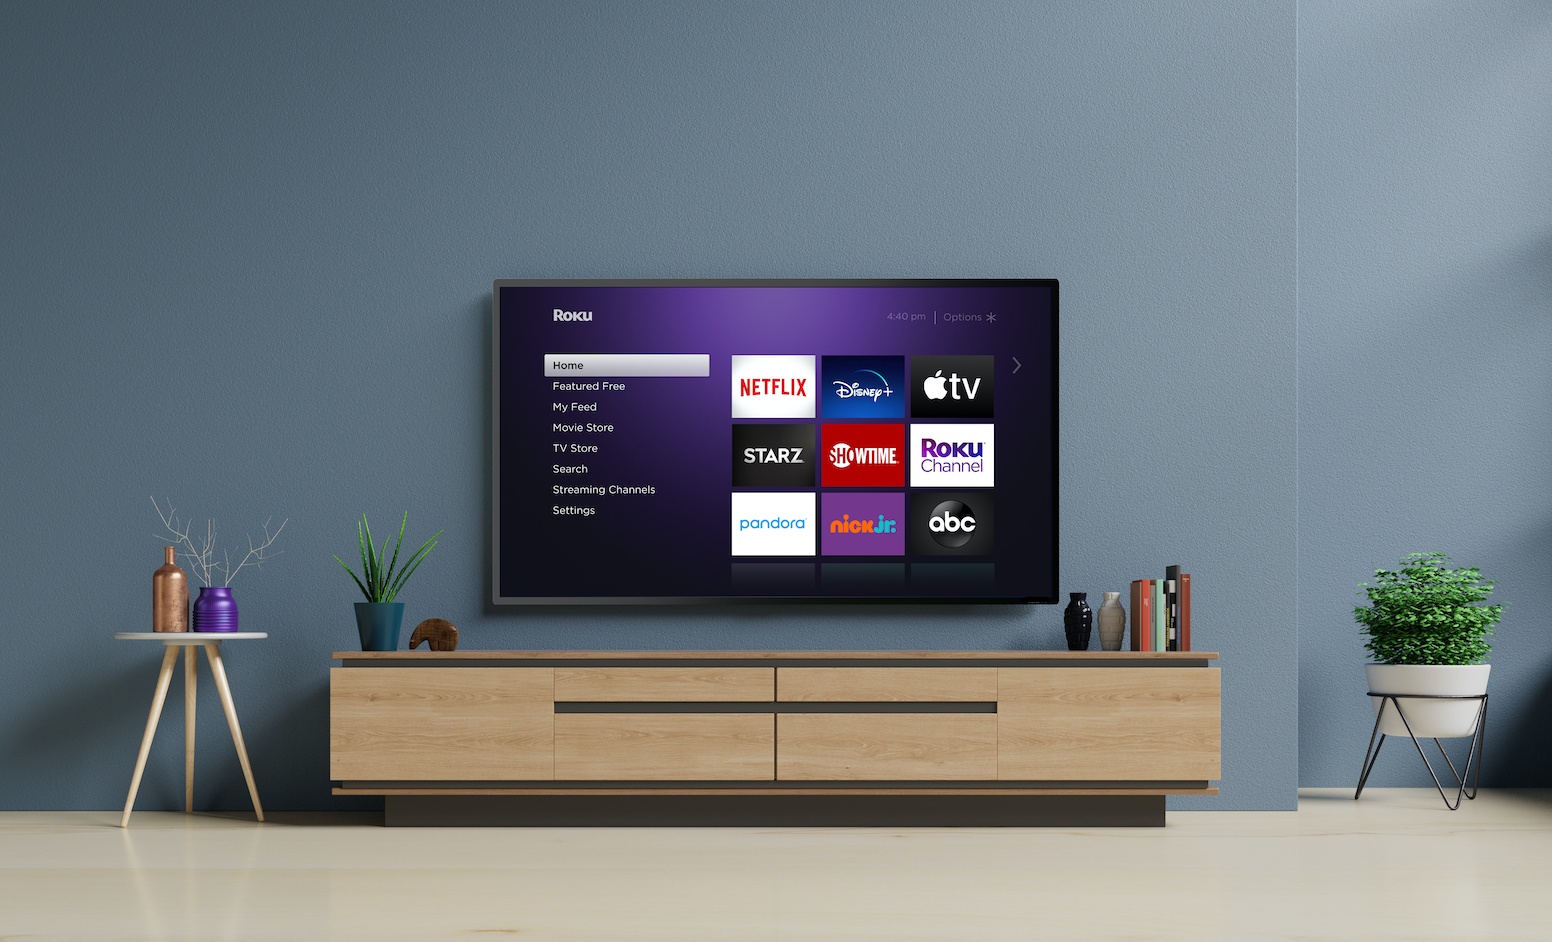 Roku Added 2.9 Million Accounts Last Quarter, Overall Streaming Reached 13.2 Billion Hours